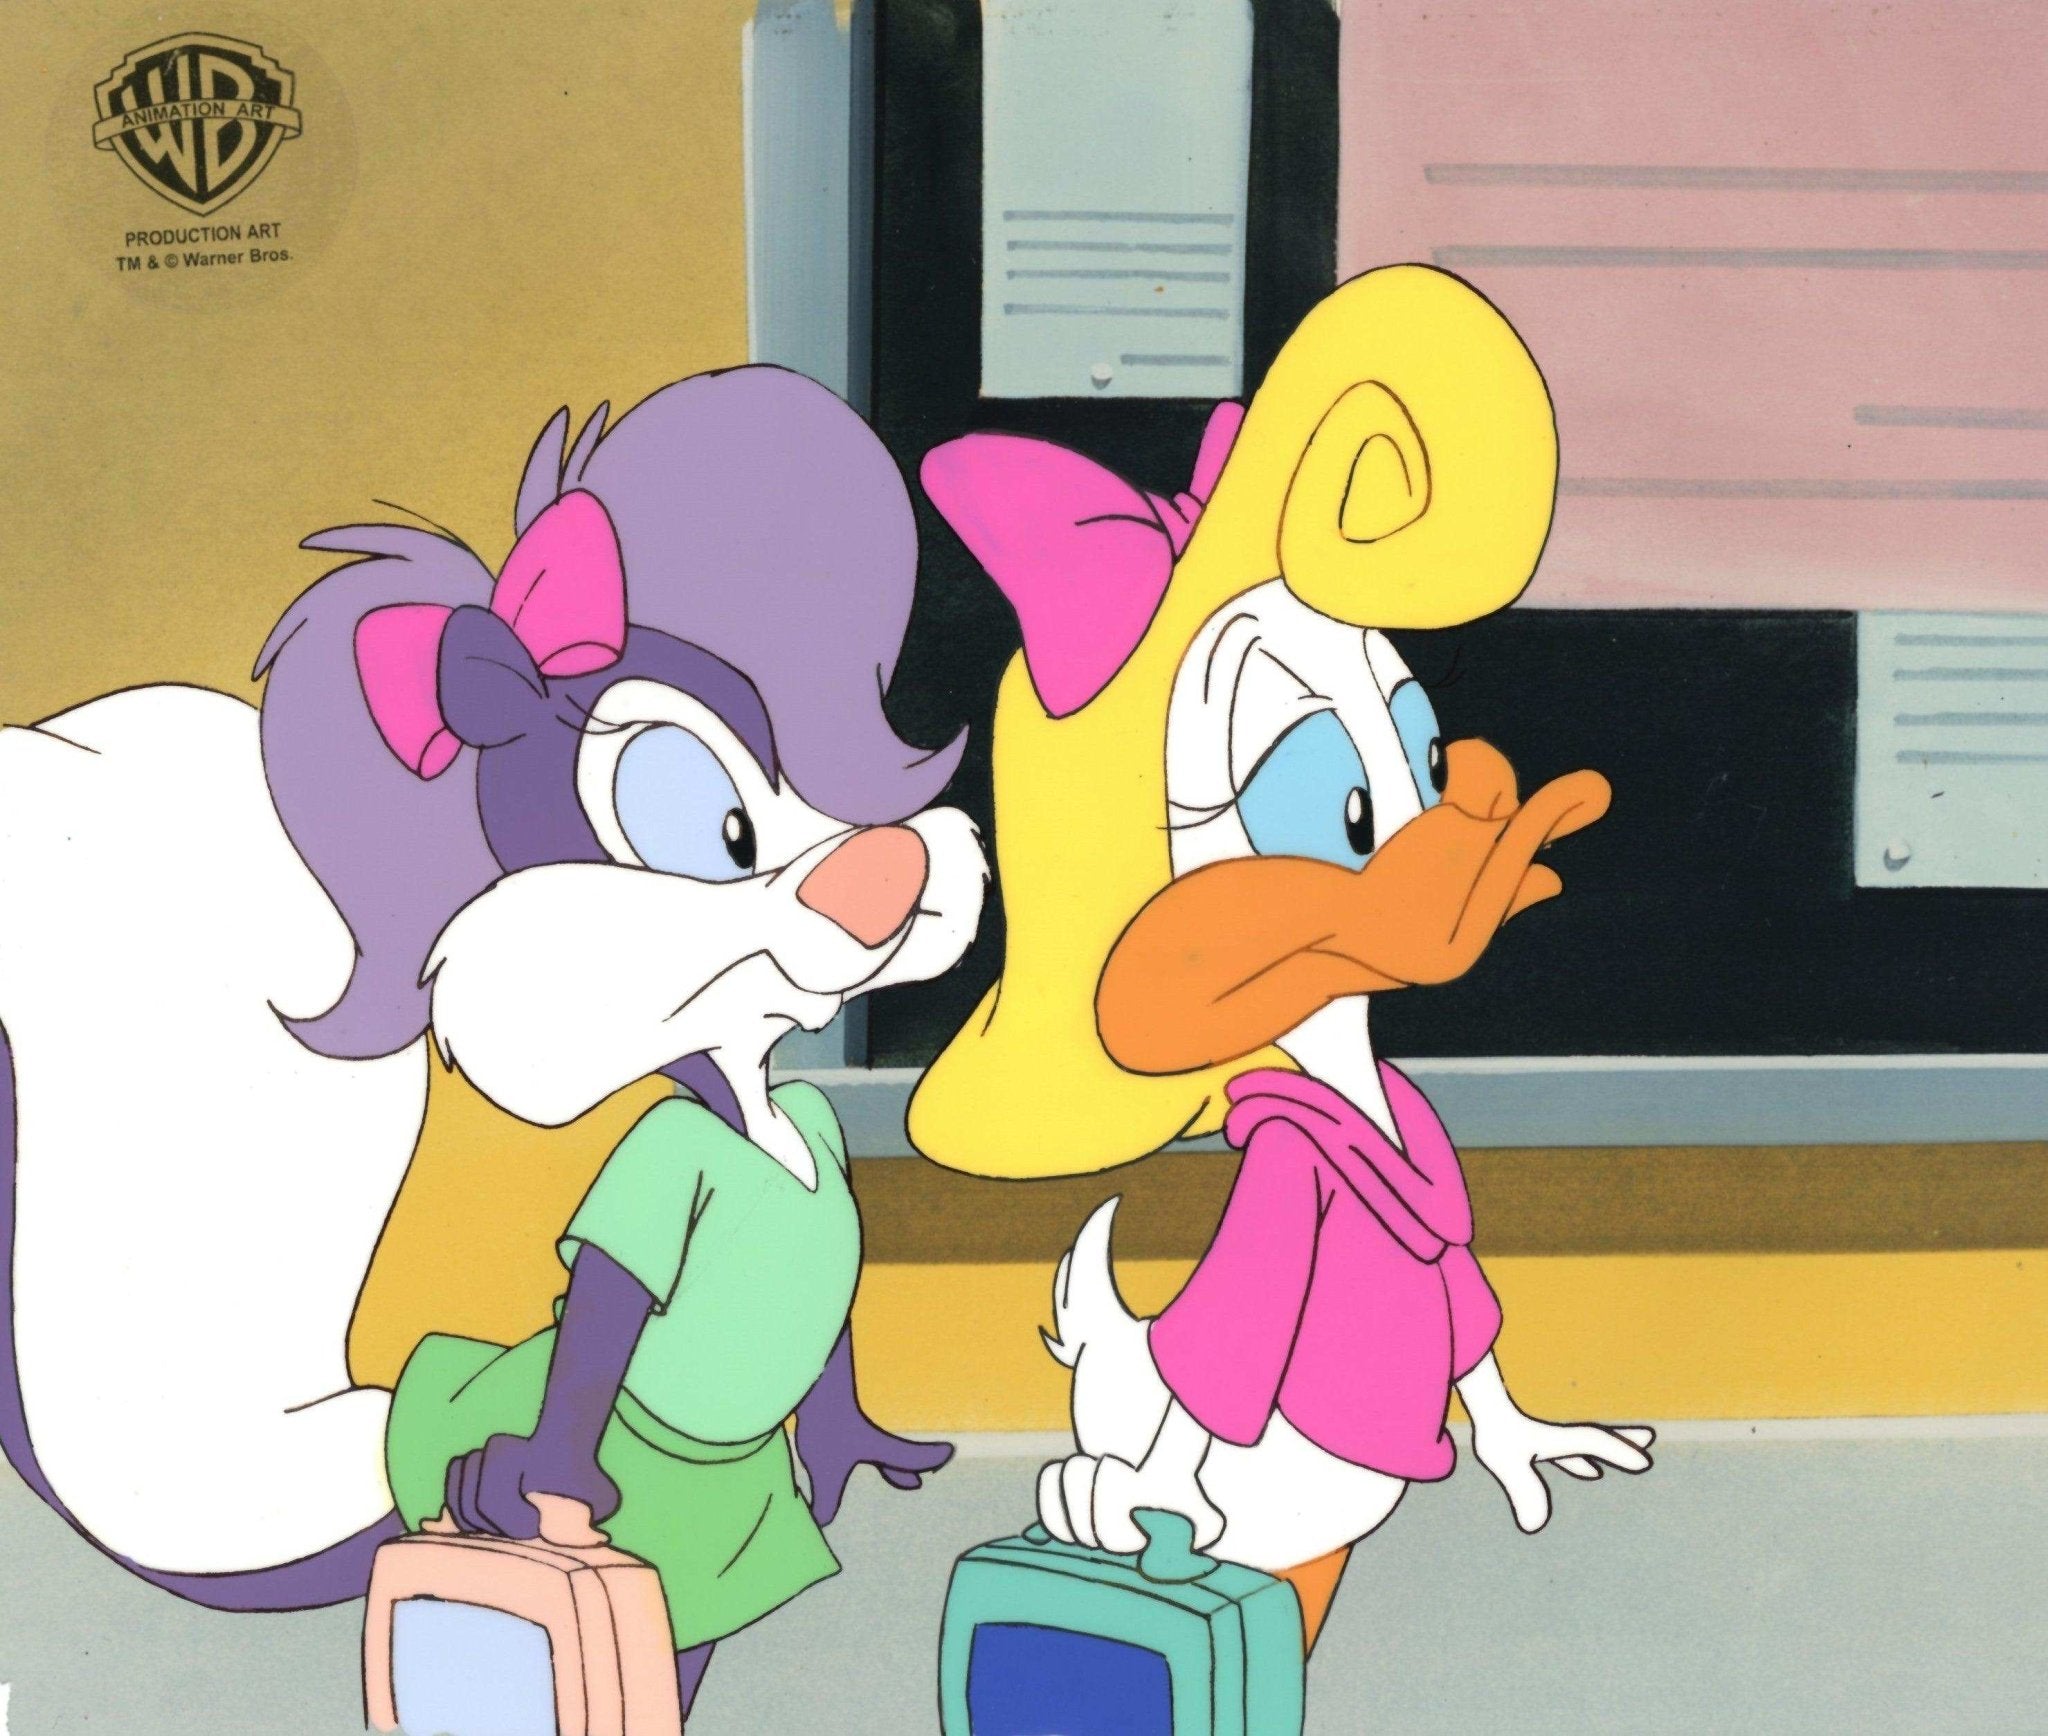 Tiny Toons Original Production Cel: Shirley the Loon and Fifi La